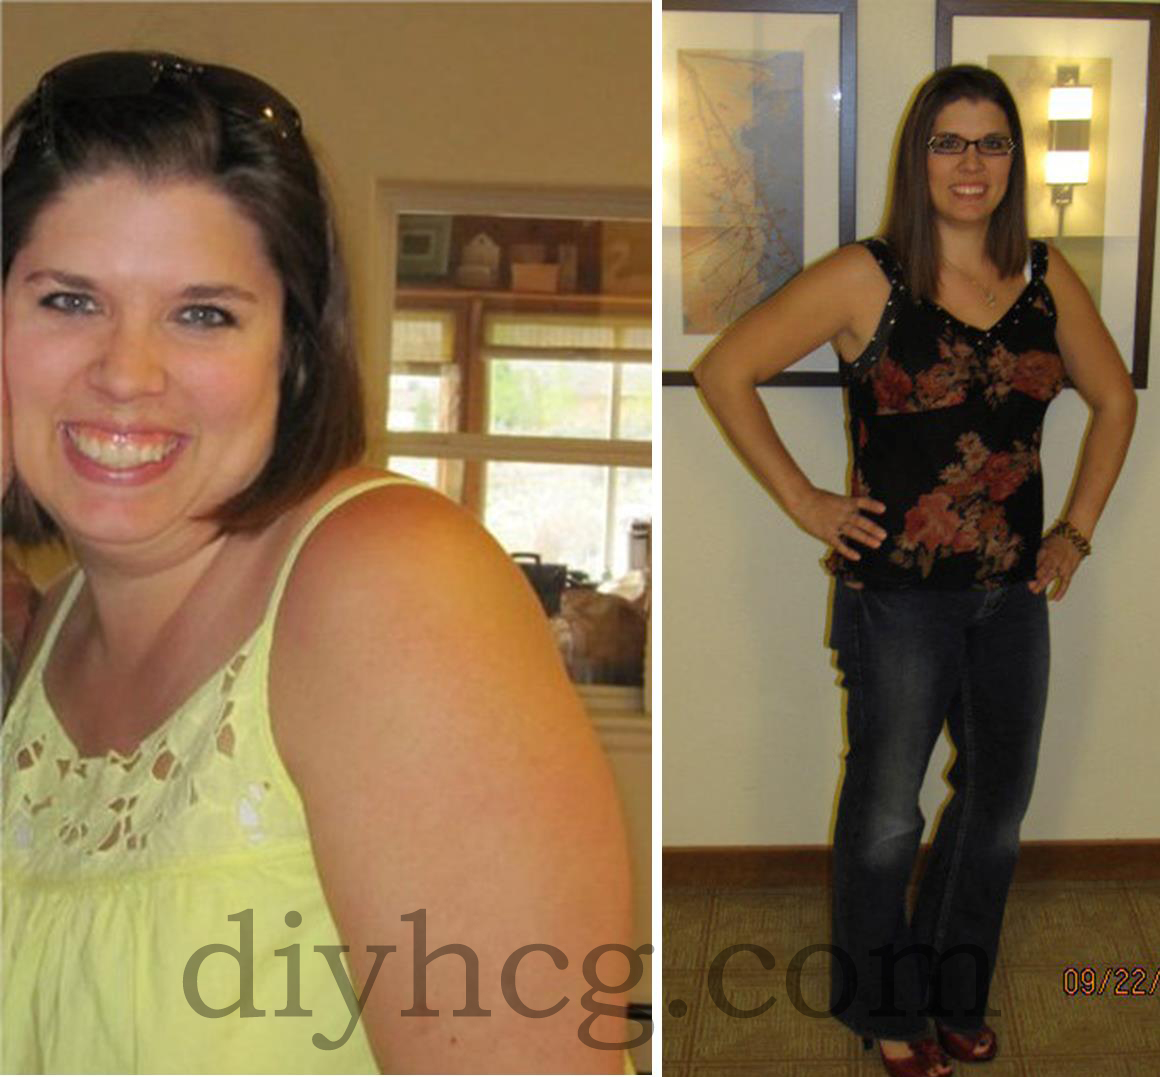 DIY HCG Diet Before and After Photos See Rachael's Success